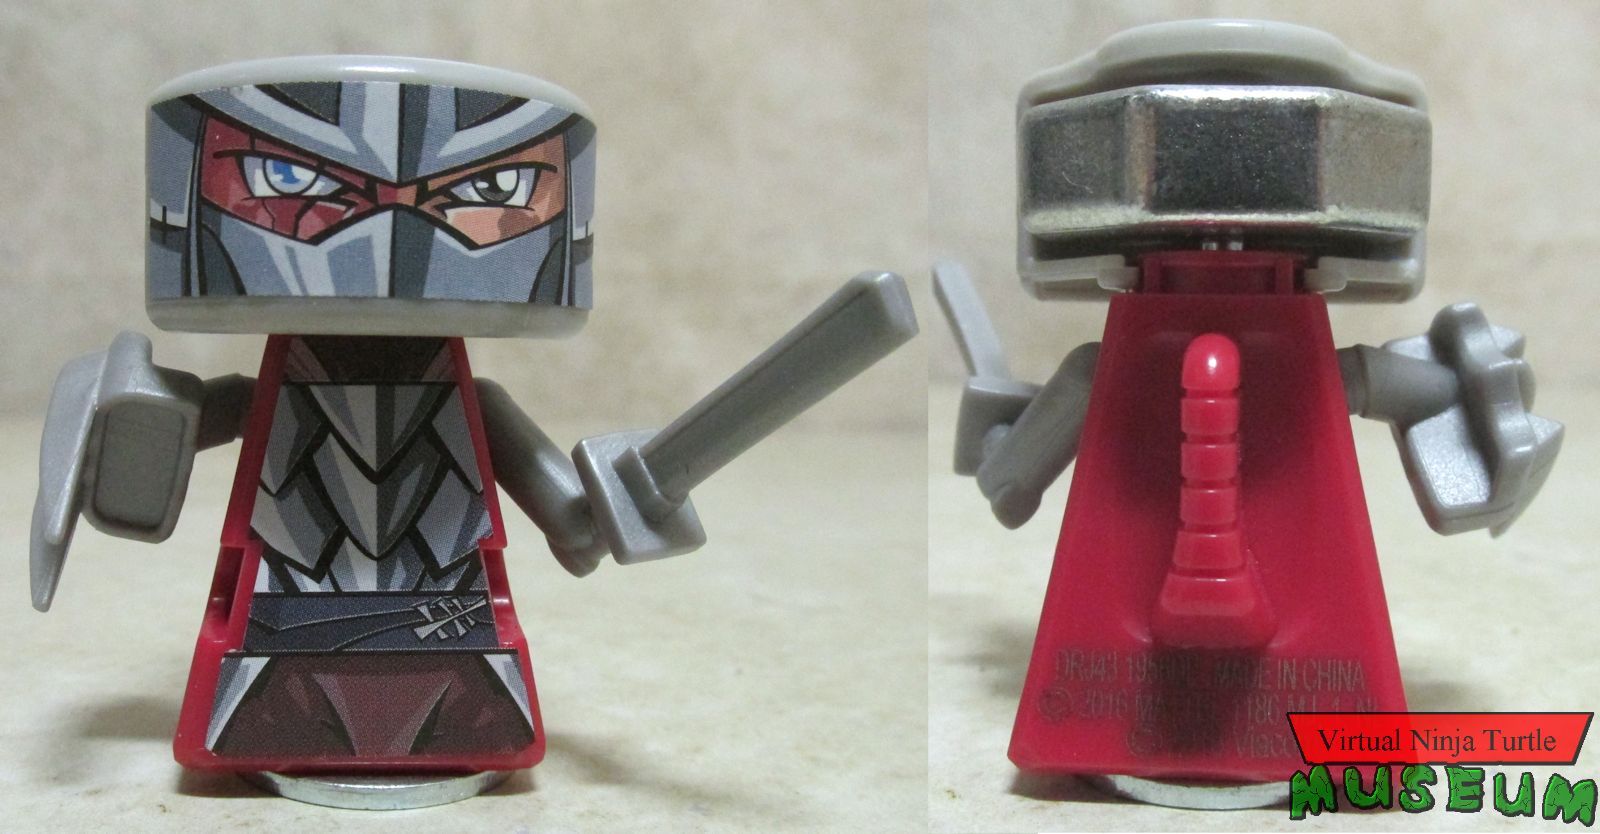 Rip-Spin Warriors 2 Pack Shredder front and back